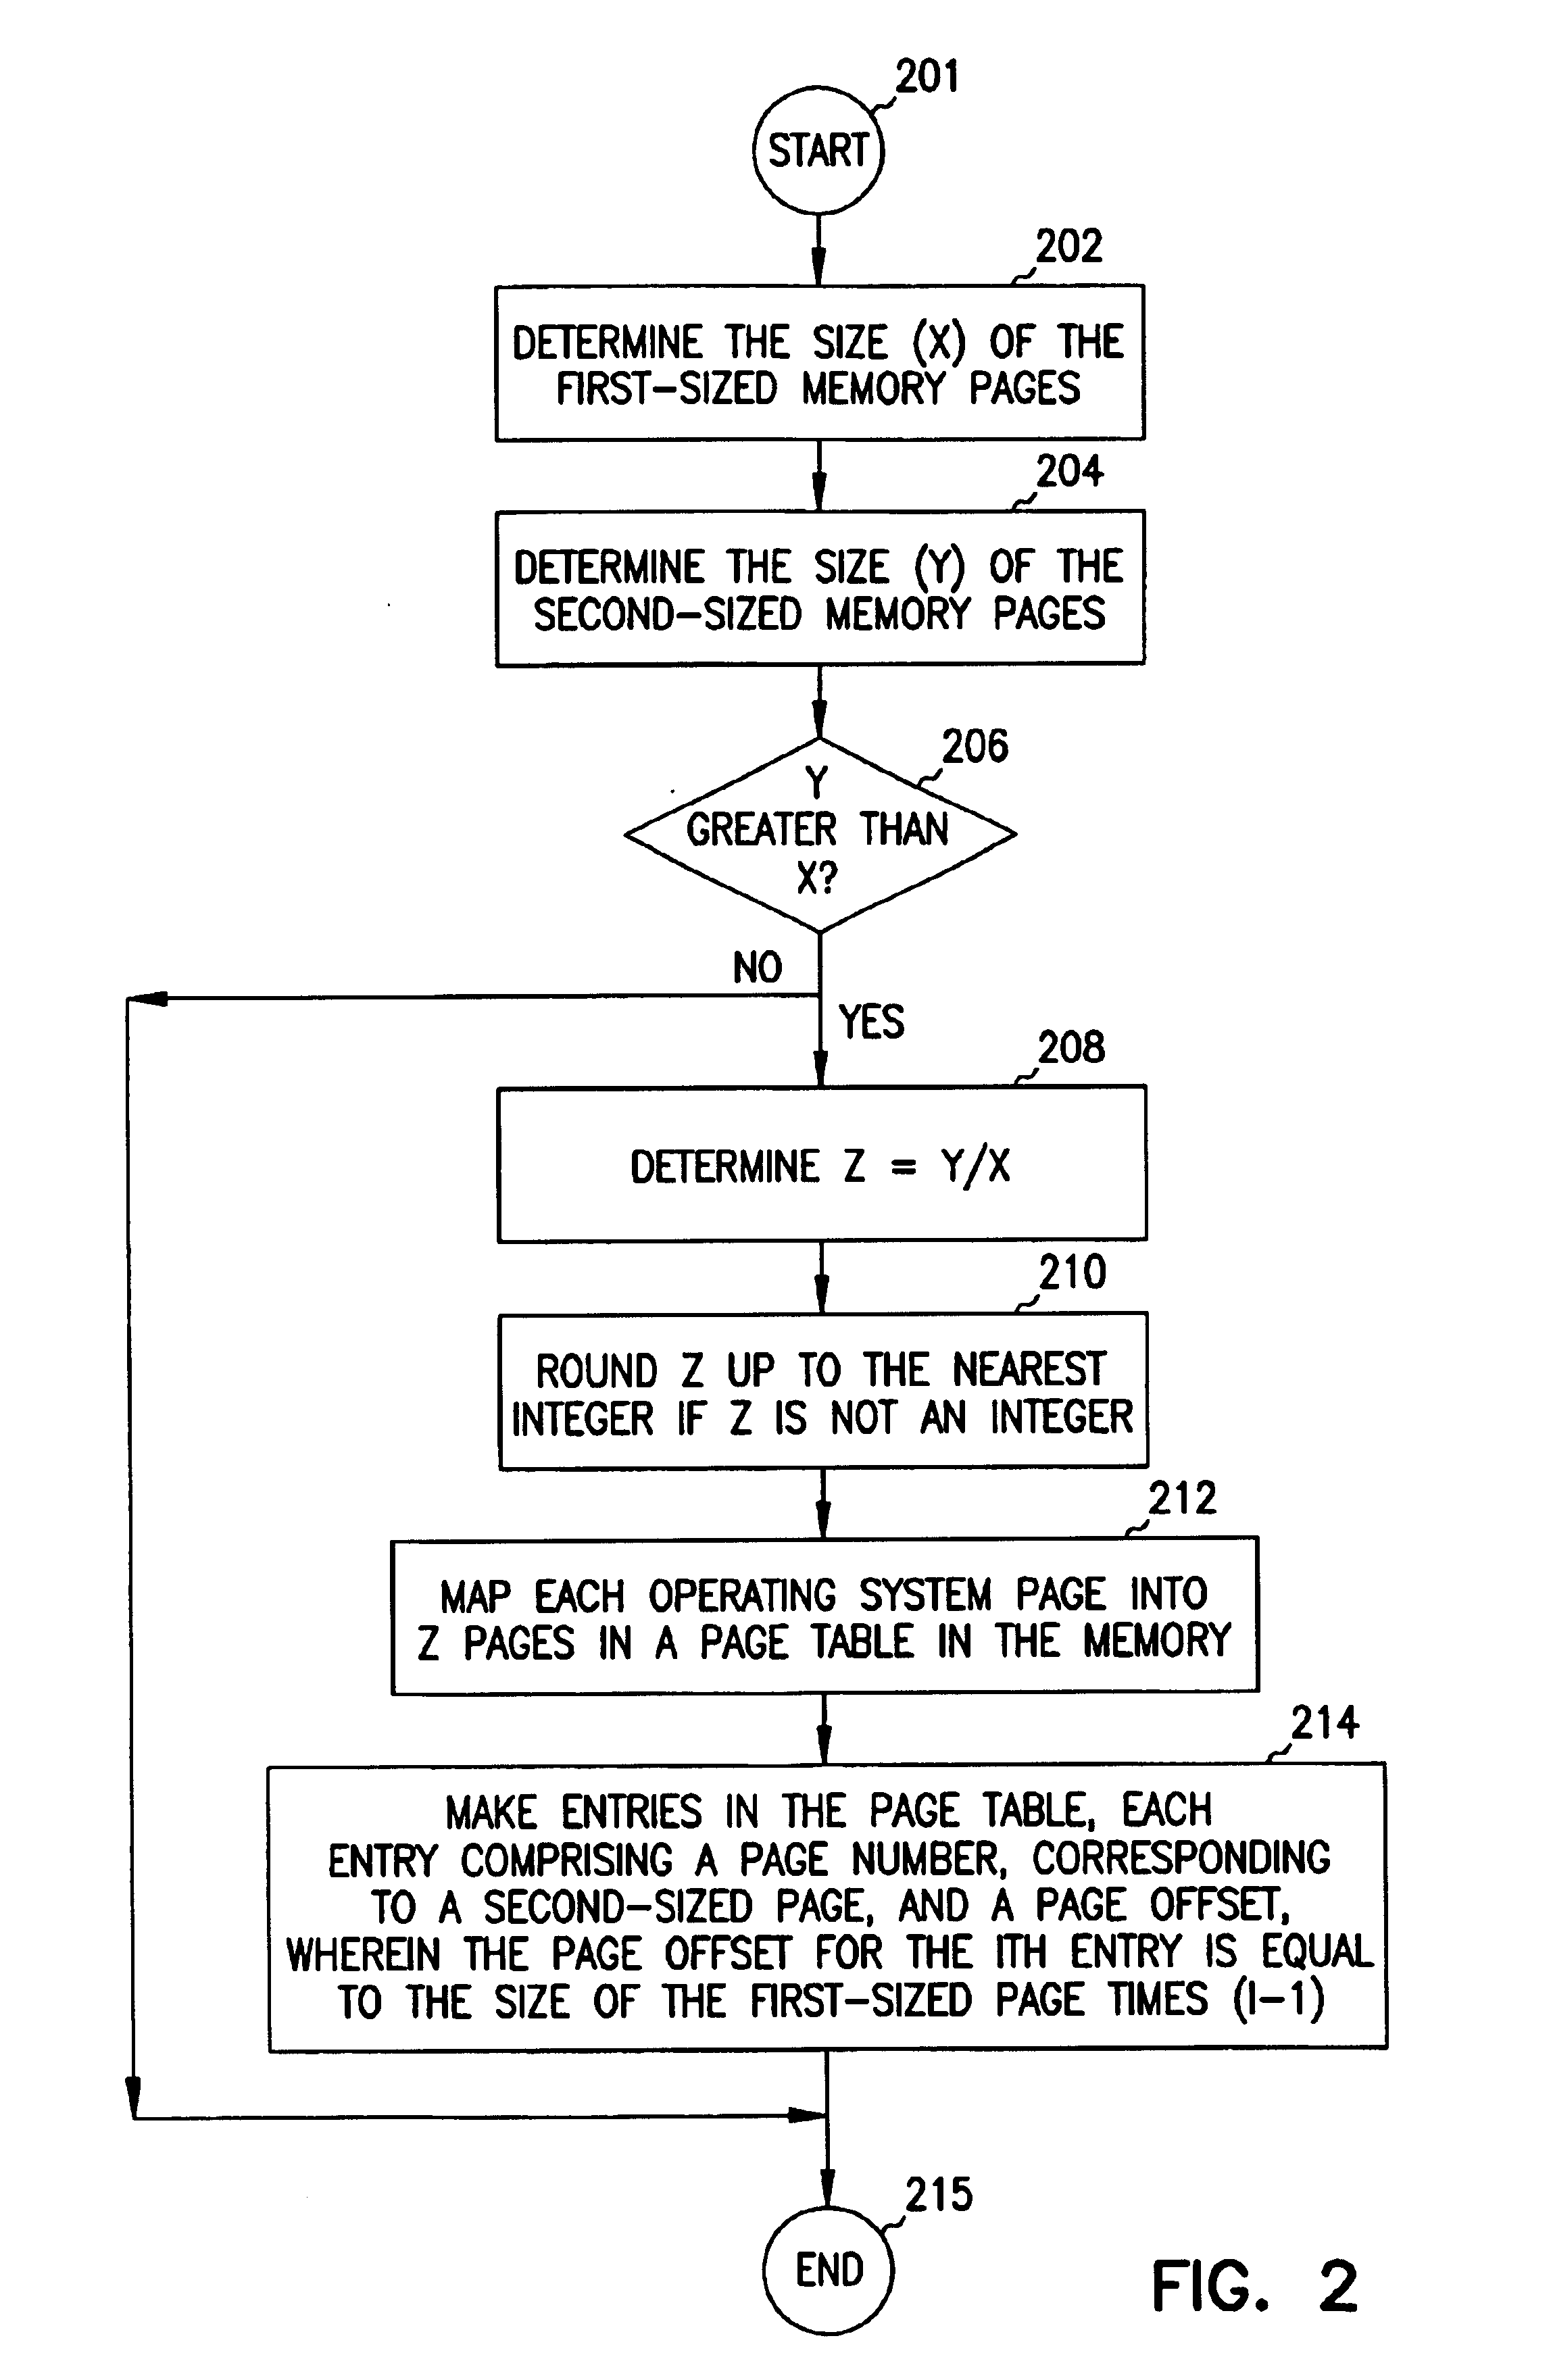 Apparatus to map virtual pages to disparate-sized, non-contiguous real pages and methods relating thereto